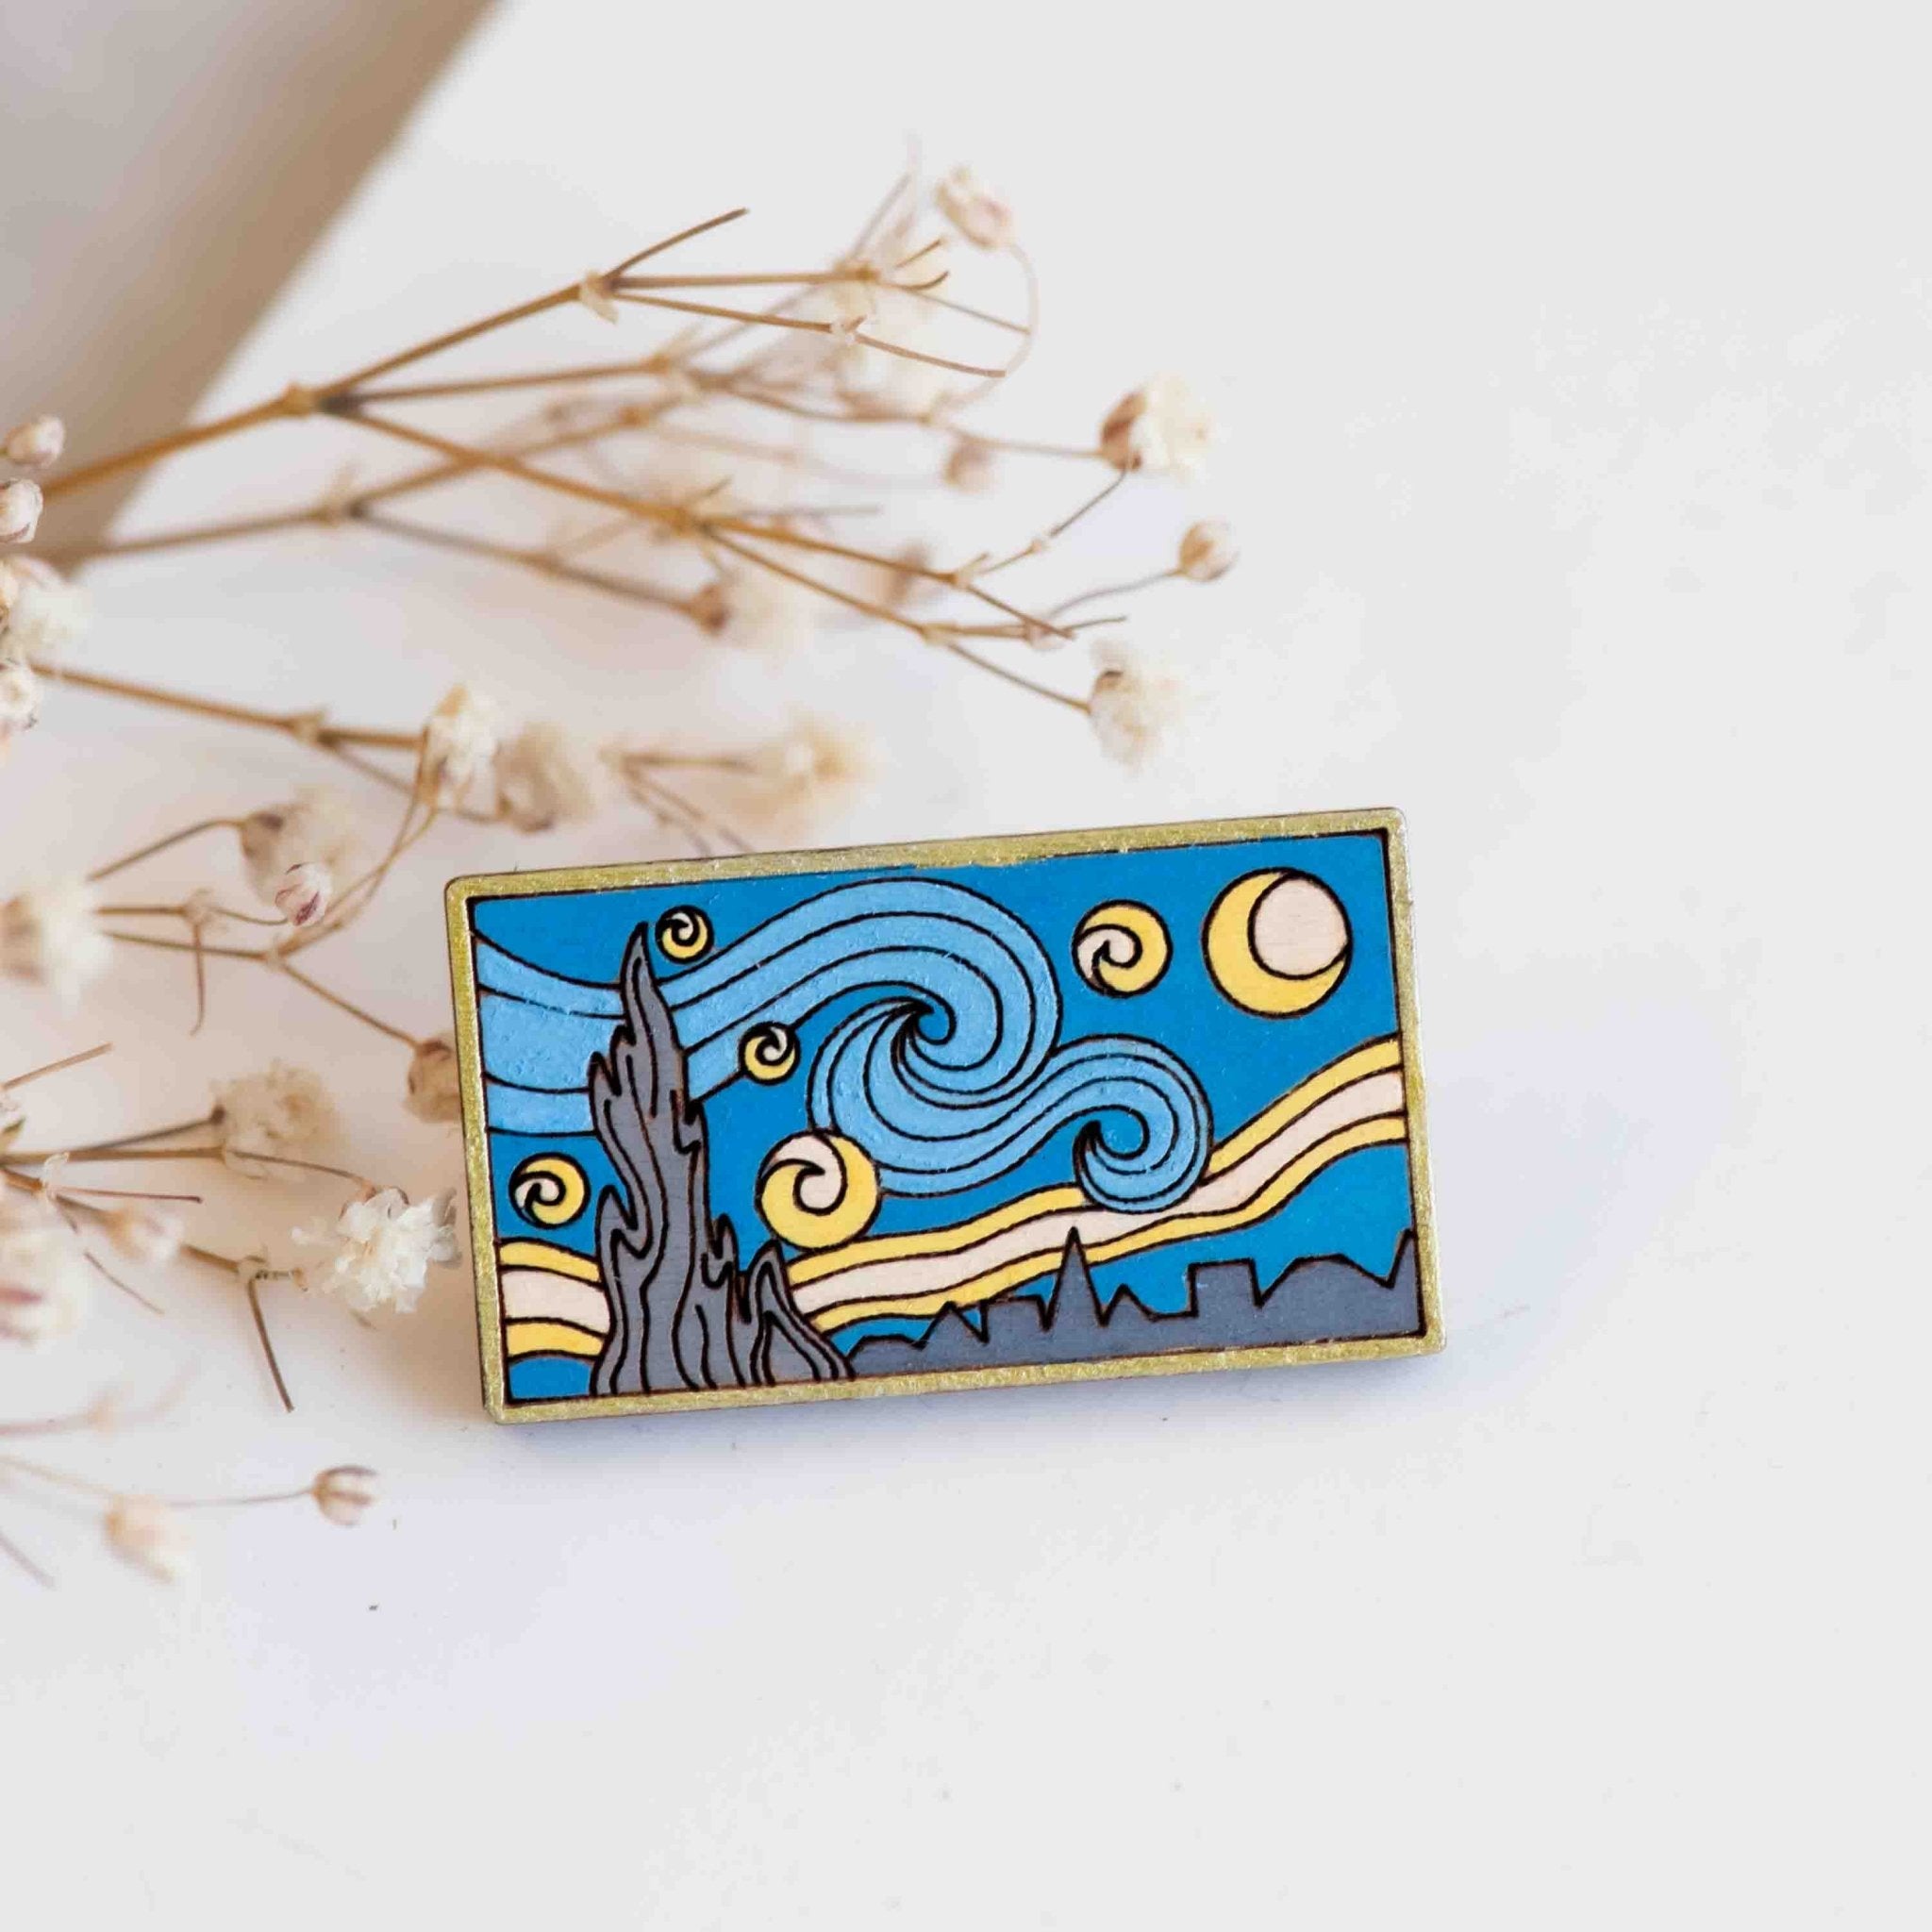 Hand-painted The Starry Night Wooden Pin Badge Inspired by Van Gogh - PT45127 - Robin Valley Official Store